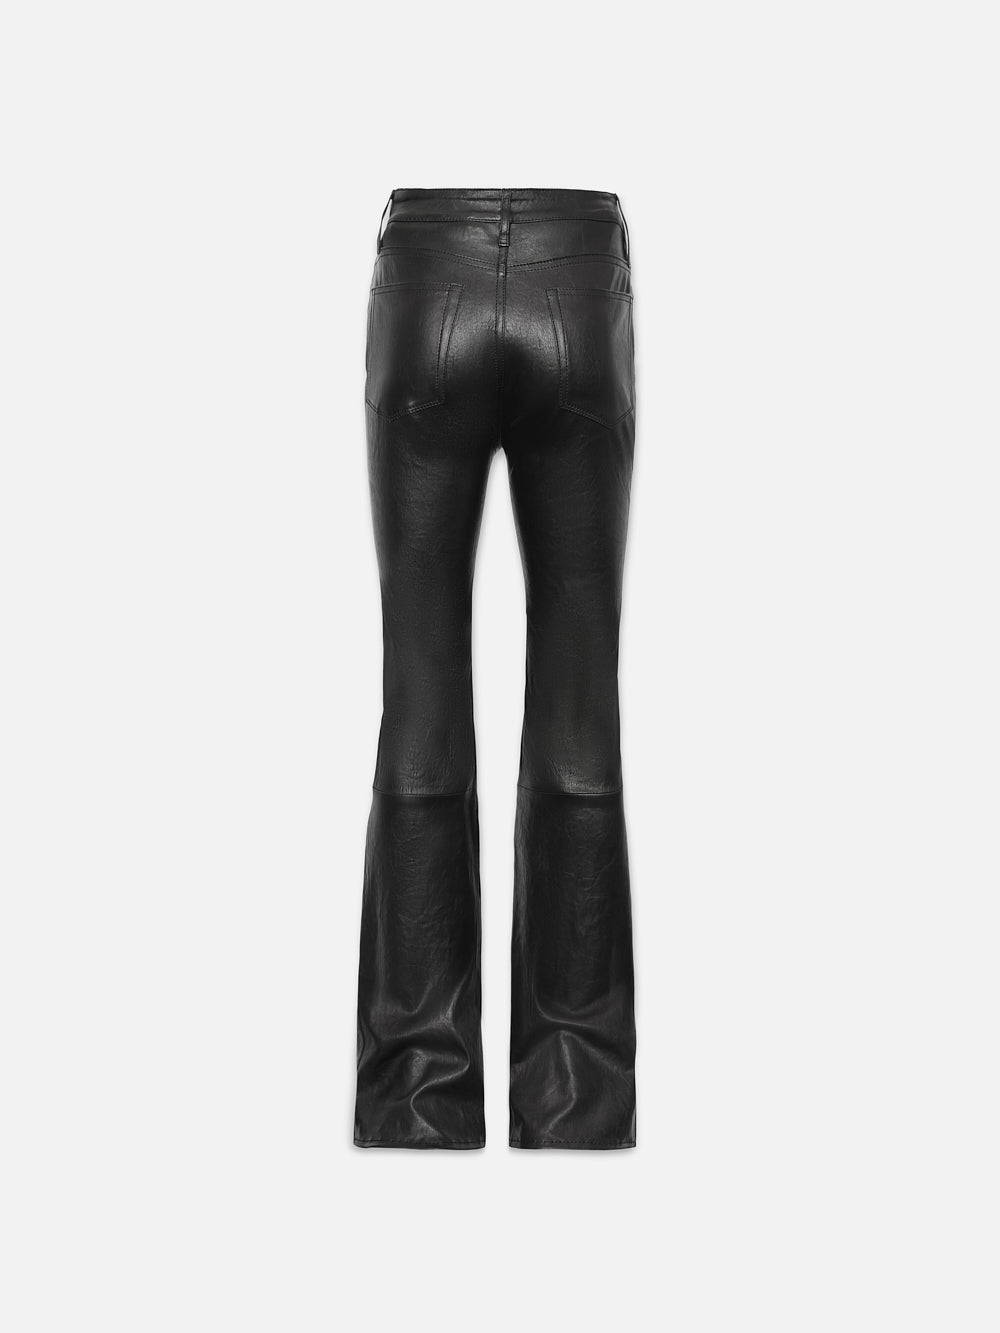 The Slim Stacked Leather Pant In Black Frame